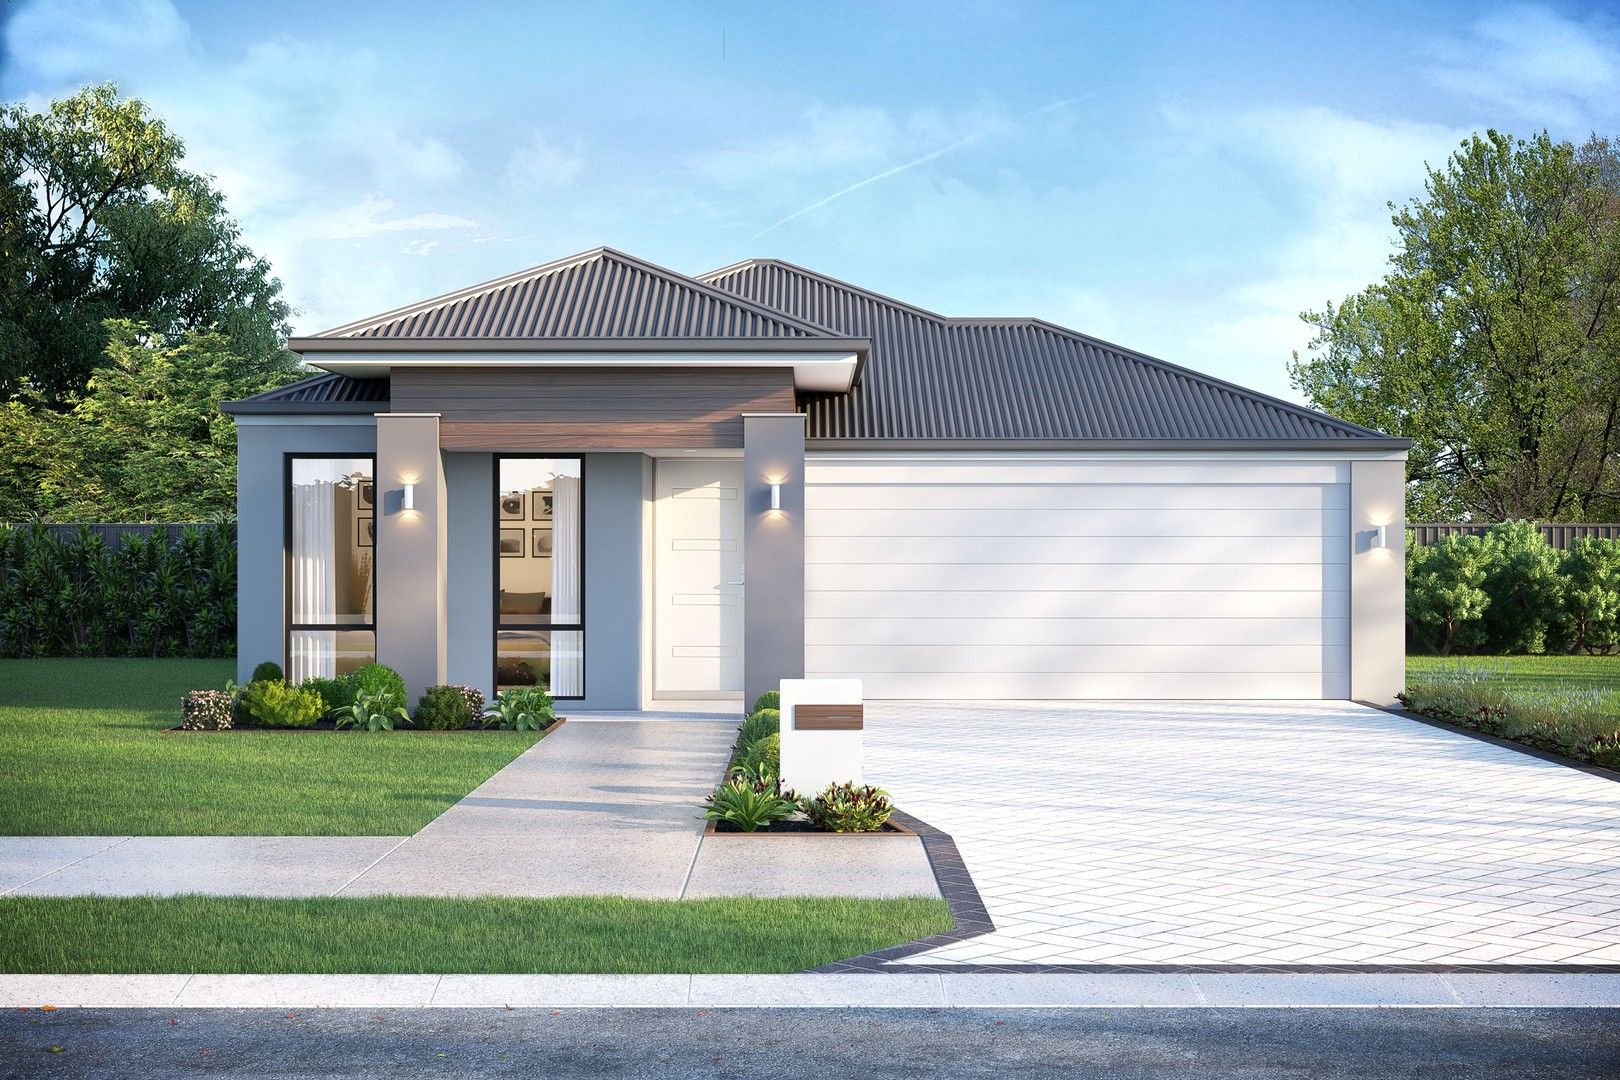 4 bedrooms New House & Land in 2114 Dahlia Rise ALKIMOS WA, 6038